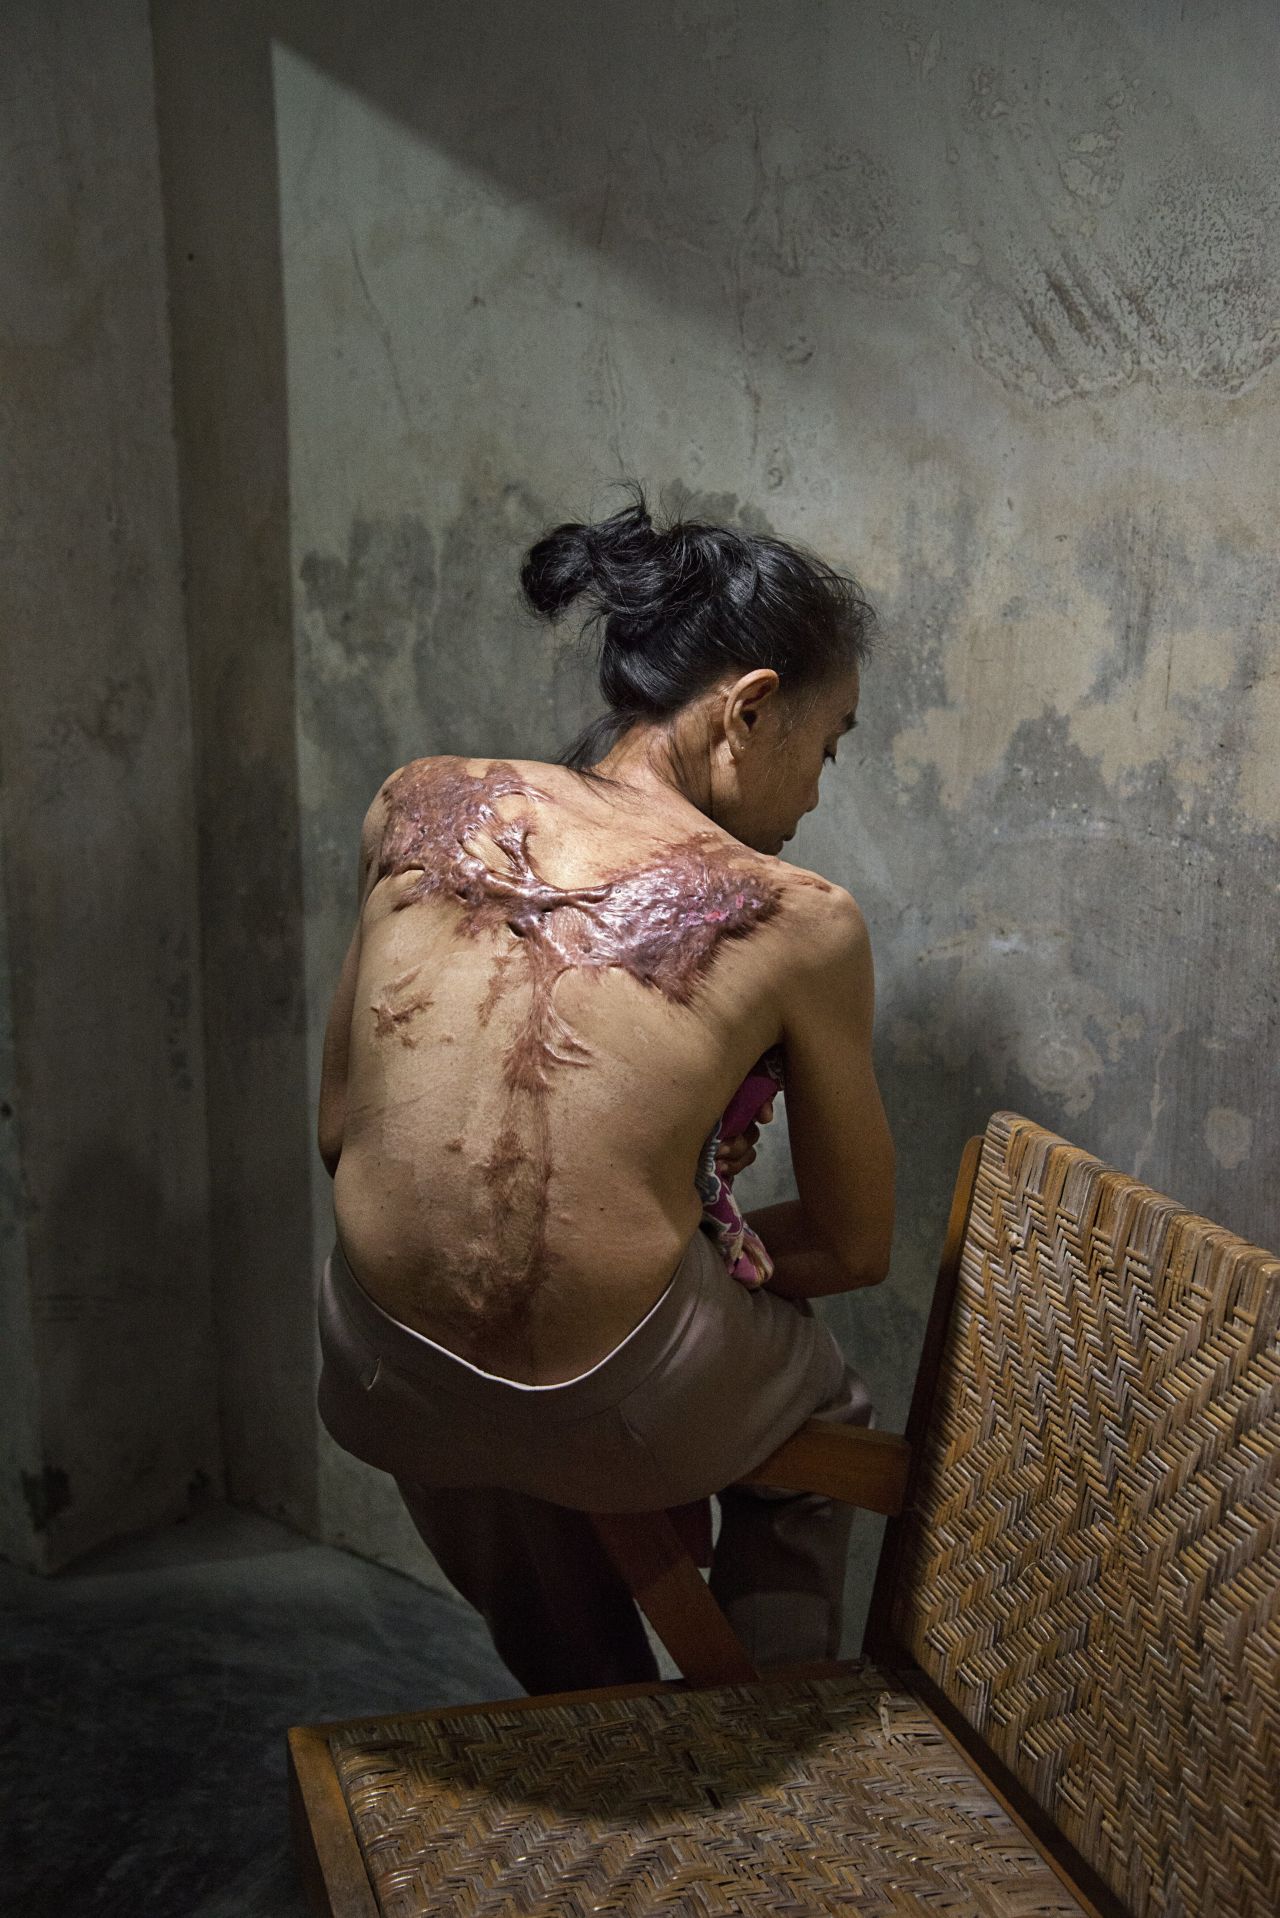 "I go to the clinic regularly to get medication. Now it is not painful any more. It was most painful the first four months." Sumasri's back and thighs are heavily scarred from the boiling water she said her male employer in Kuala Lumpur threw on her. The story of what exactly happened to her often changes when she recounts it.